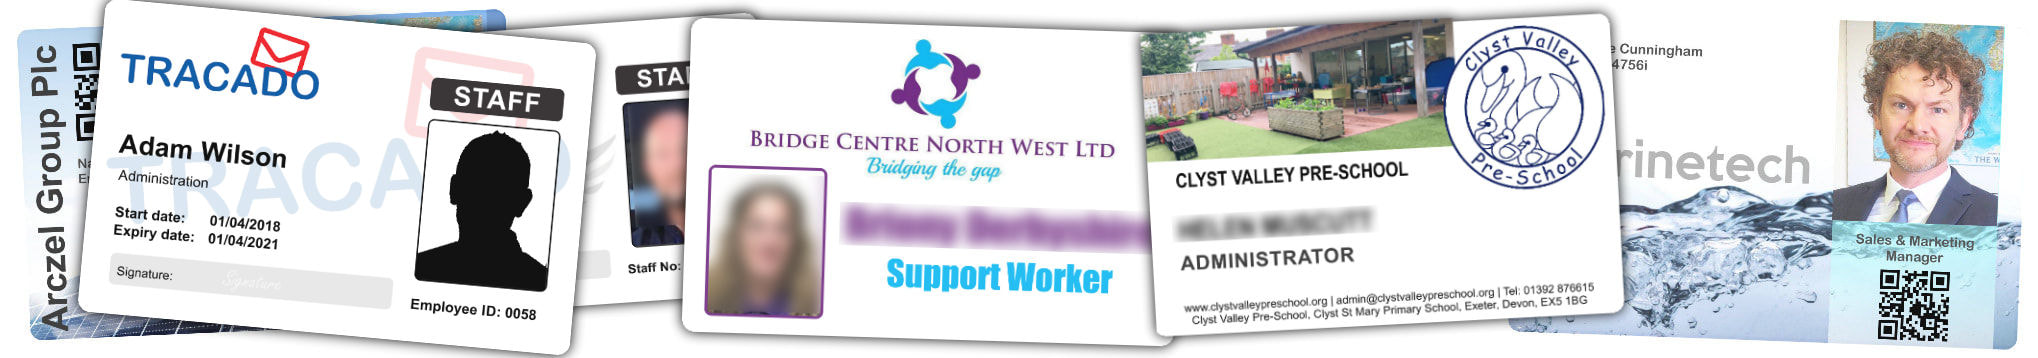 Chester examples of staff photo ID cards | samples of employee Identity card printing | Workers ID cards printed in 